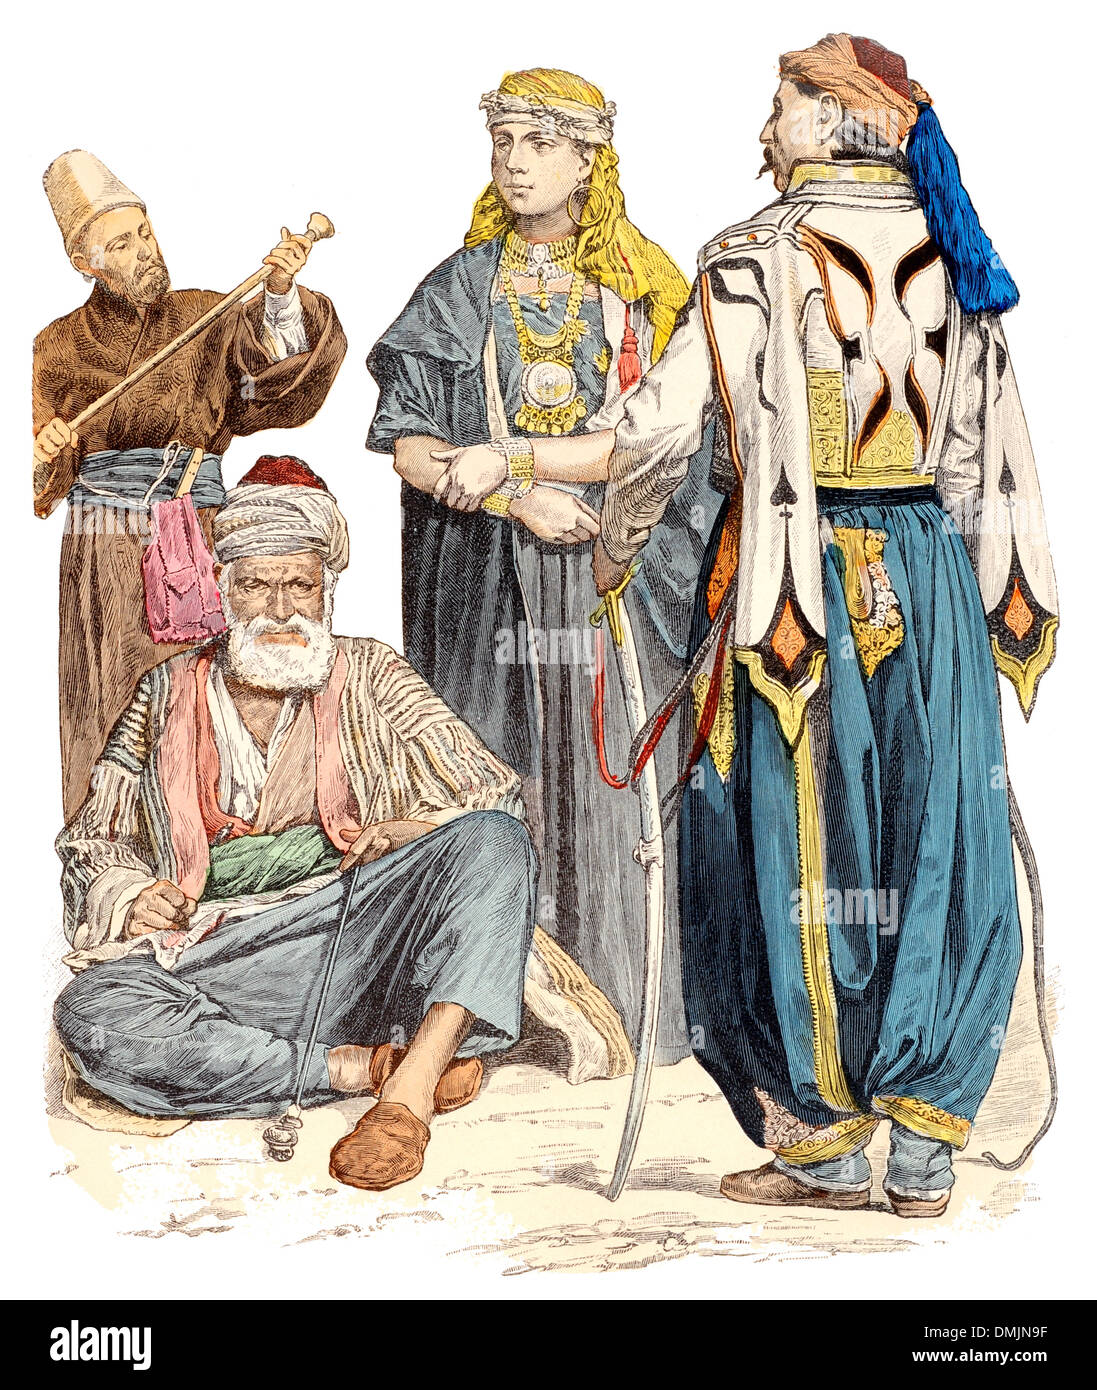 19th century XIX 1800s (Left to right) A Dervish, Syrian man, Druze woman and a man from Damascus Stock Photo